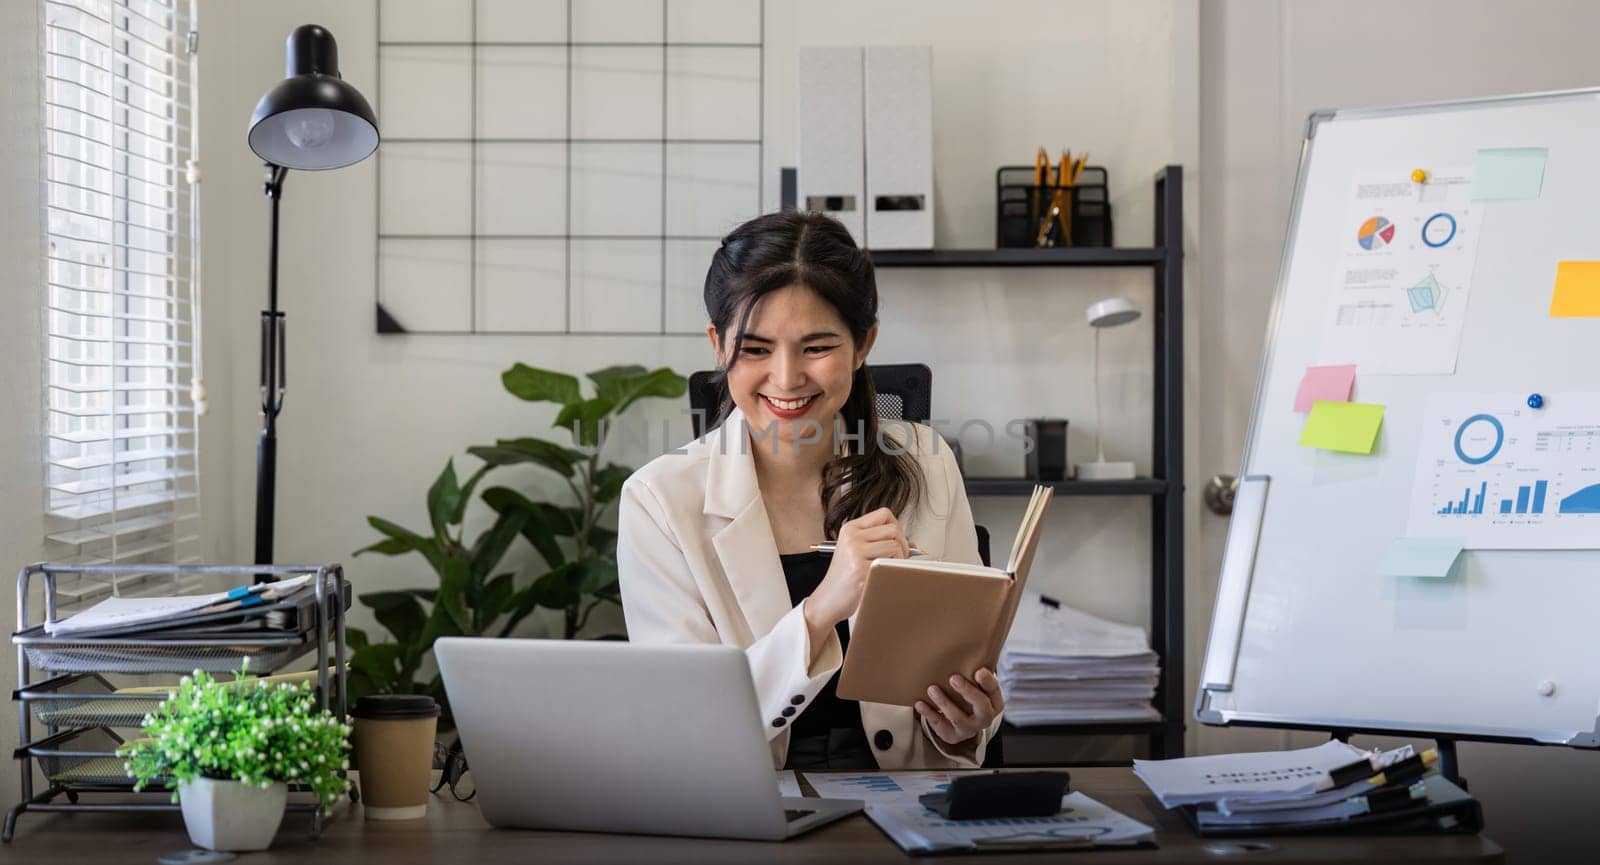 Business woman writing in a office with planning note and corporate laptop. Employee and work planner book with company paperwork.